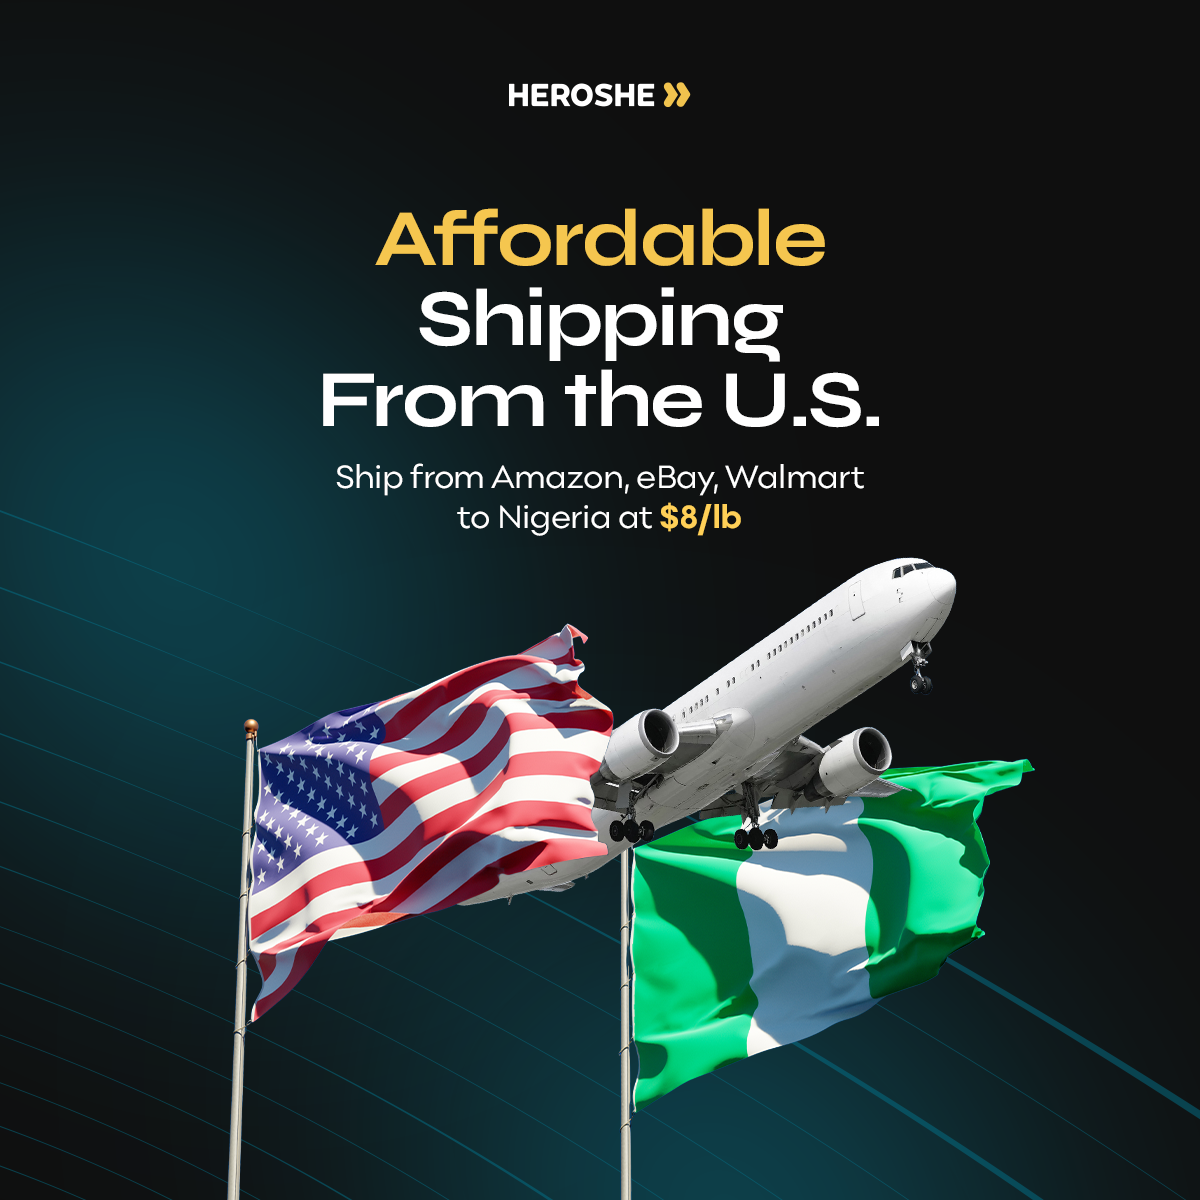 Affordable shipping from the U.S to Nigeria